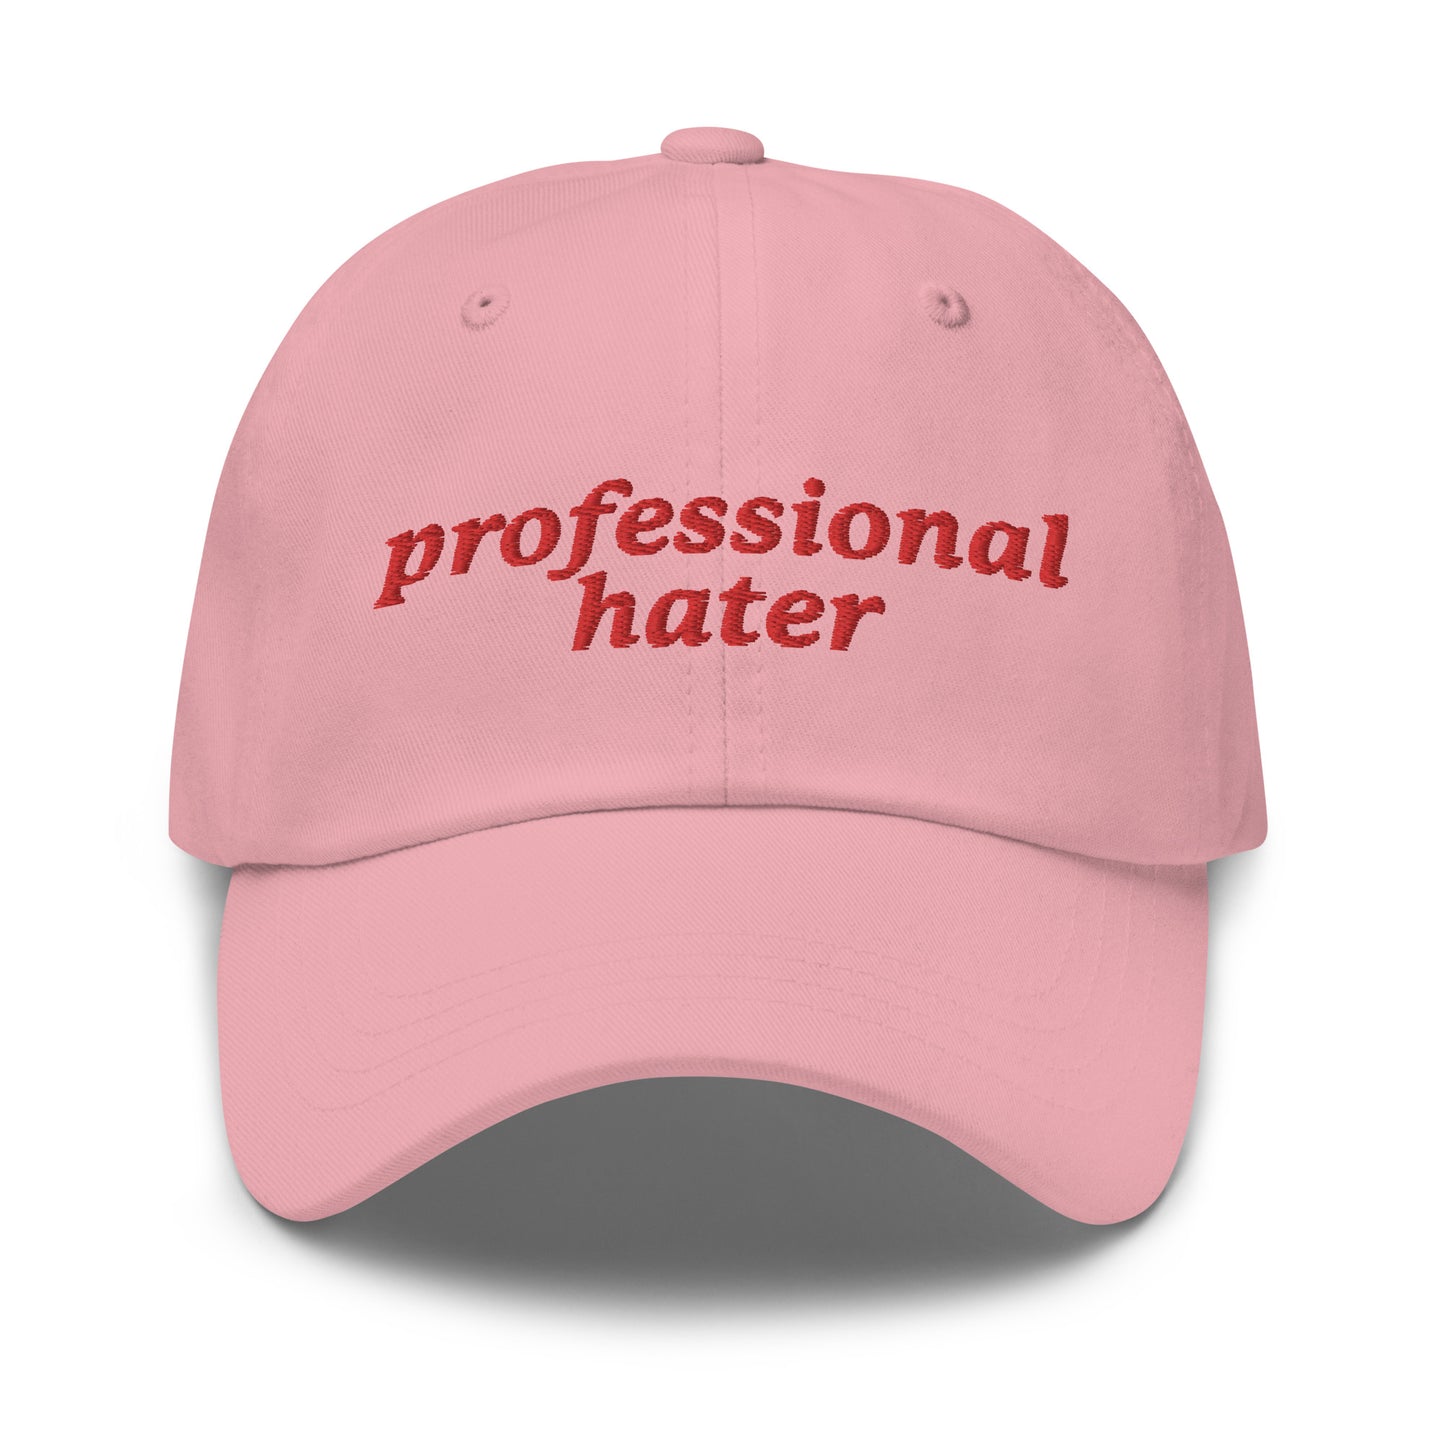 Professional Hater hat